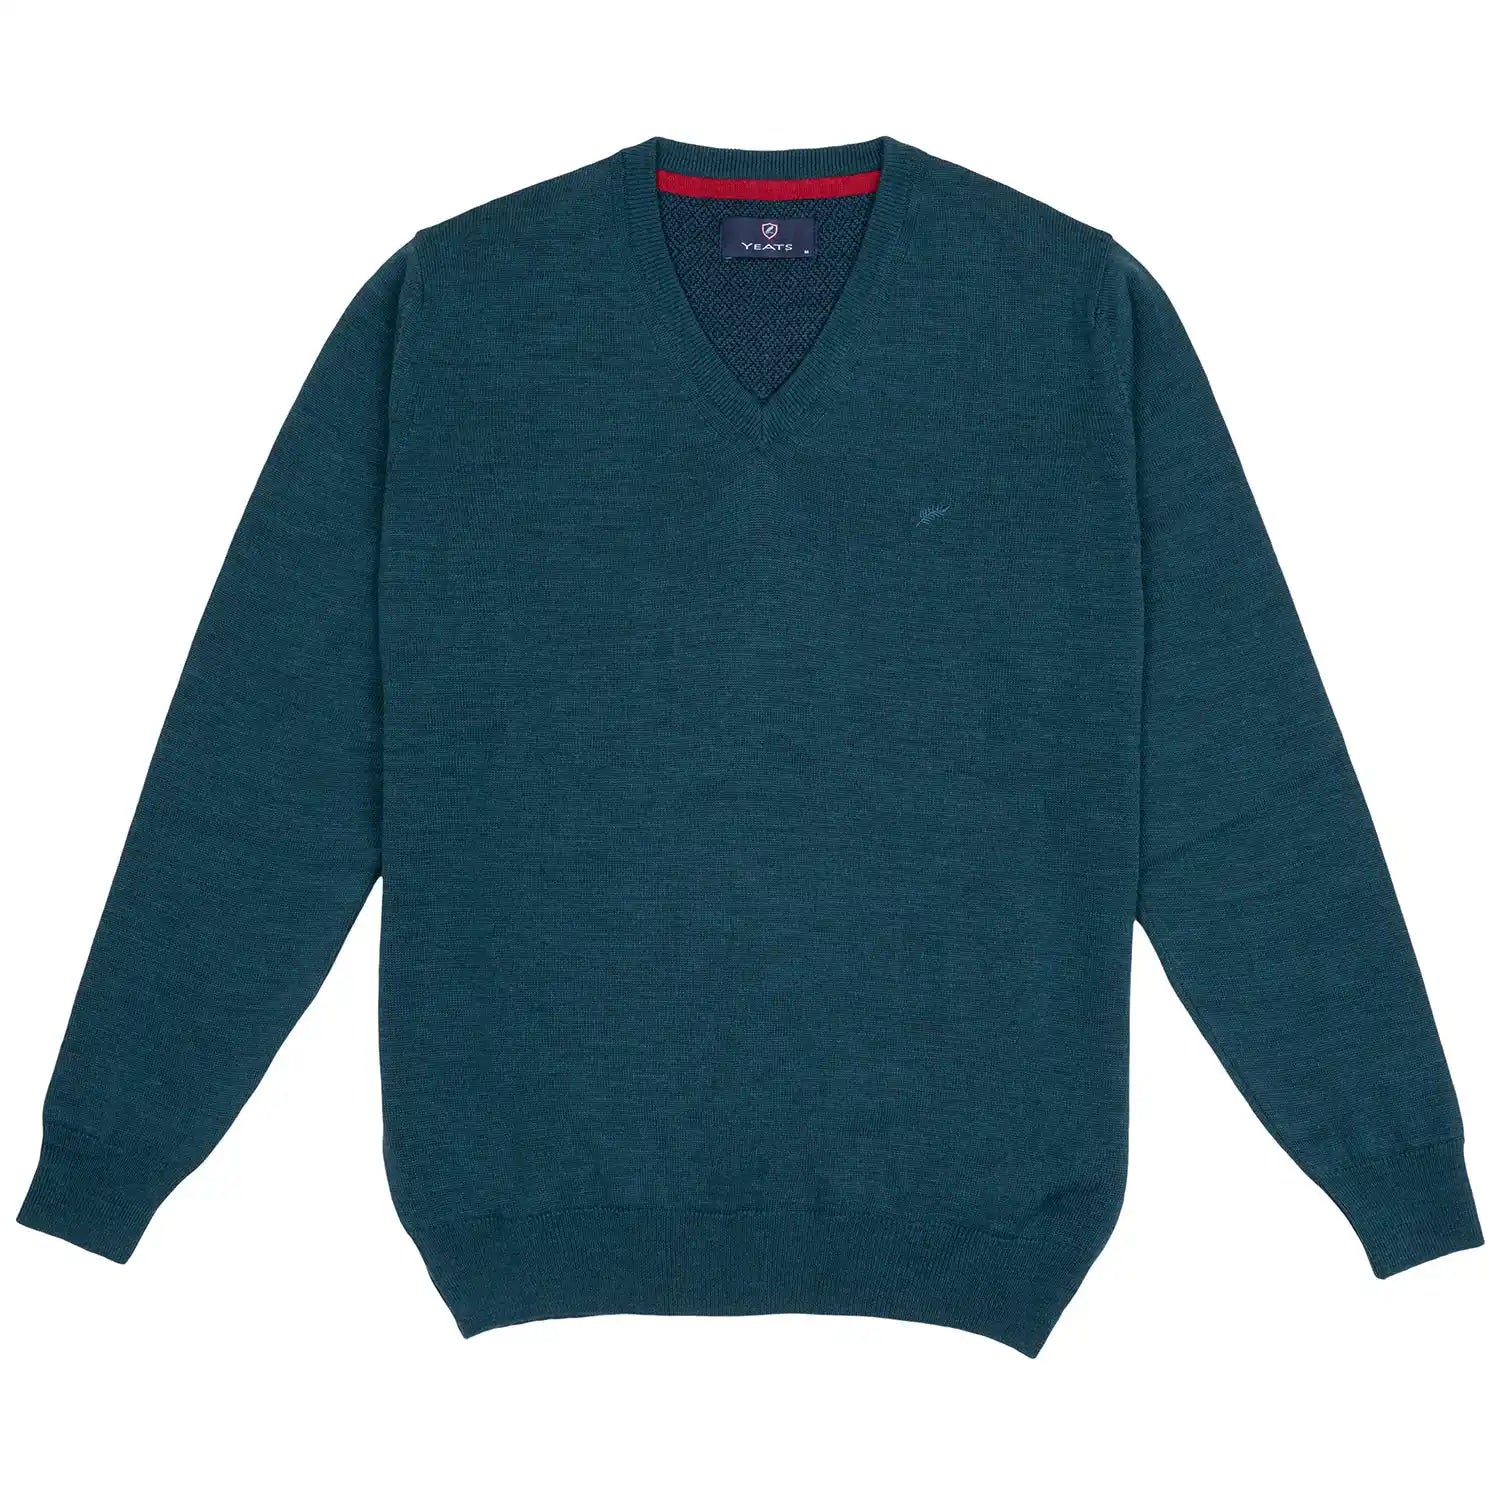 Yeats Plain V Neck Jumper - Teal 1 Shaws Department Stores